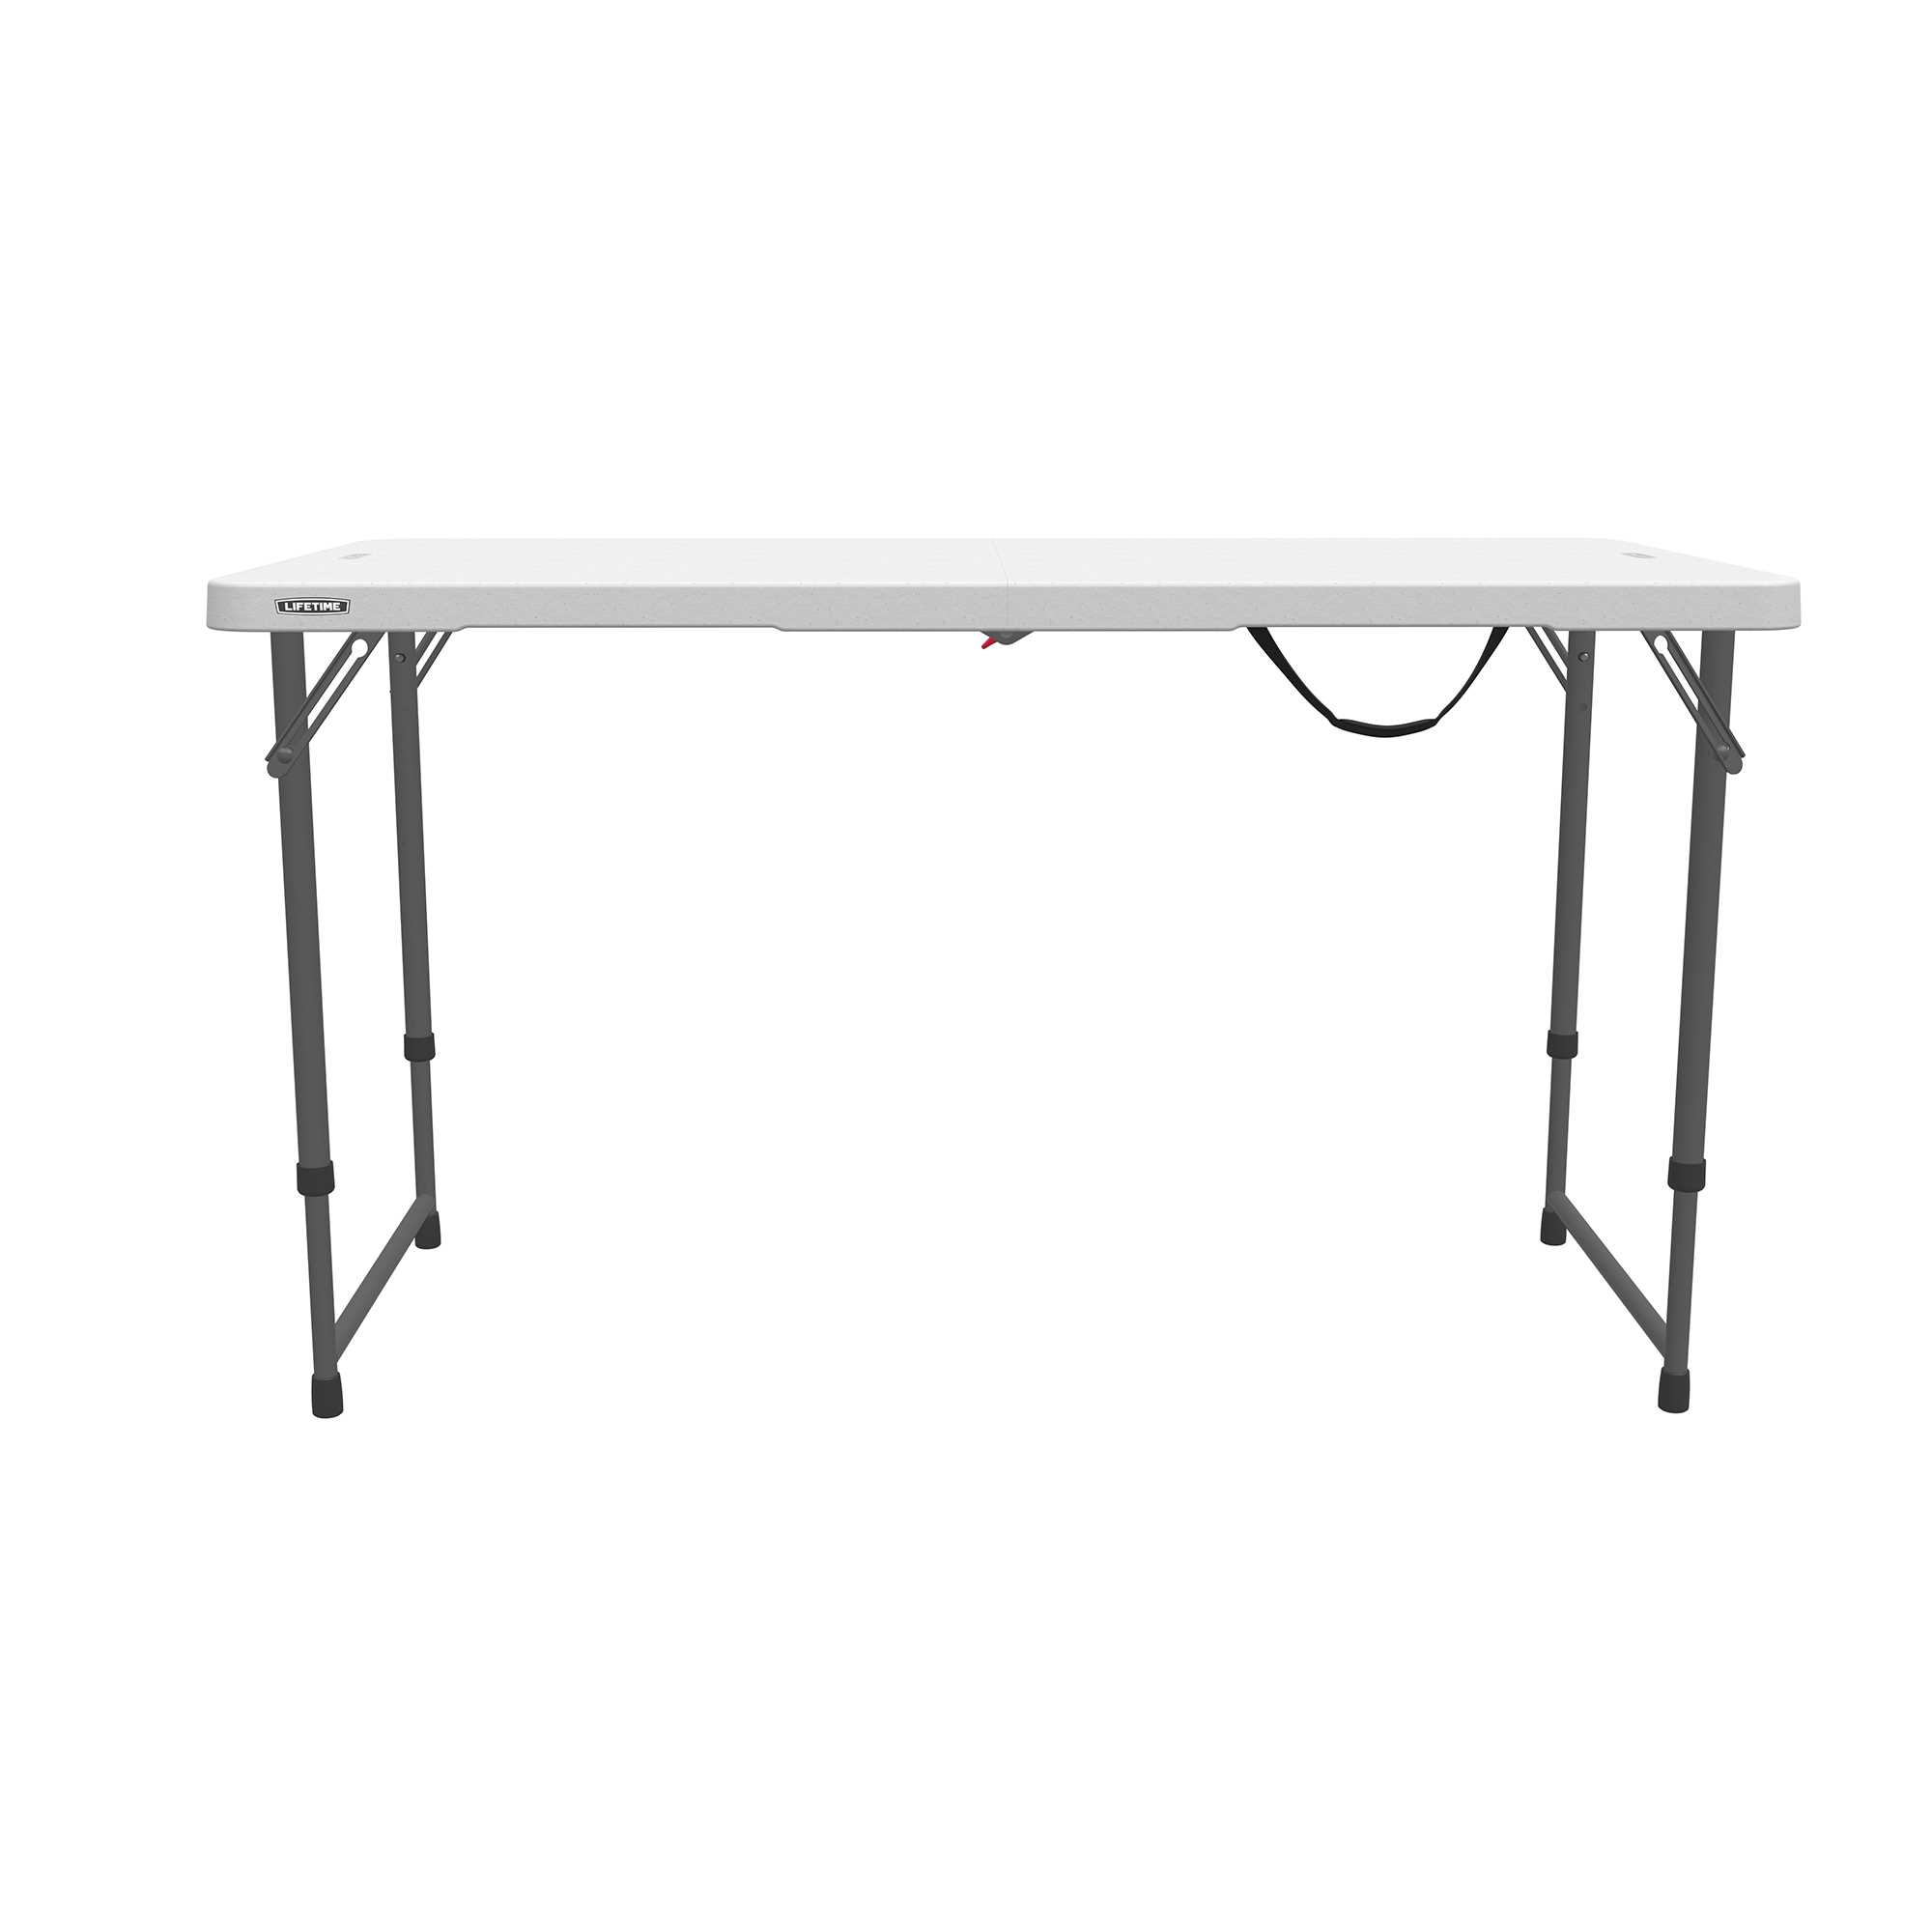 4ft Rectangular FIH folding table 122cm / Adjustable height / 4 people / light commercial